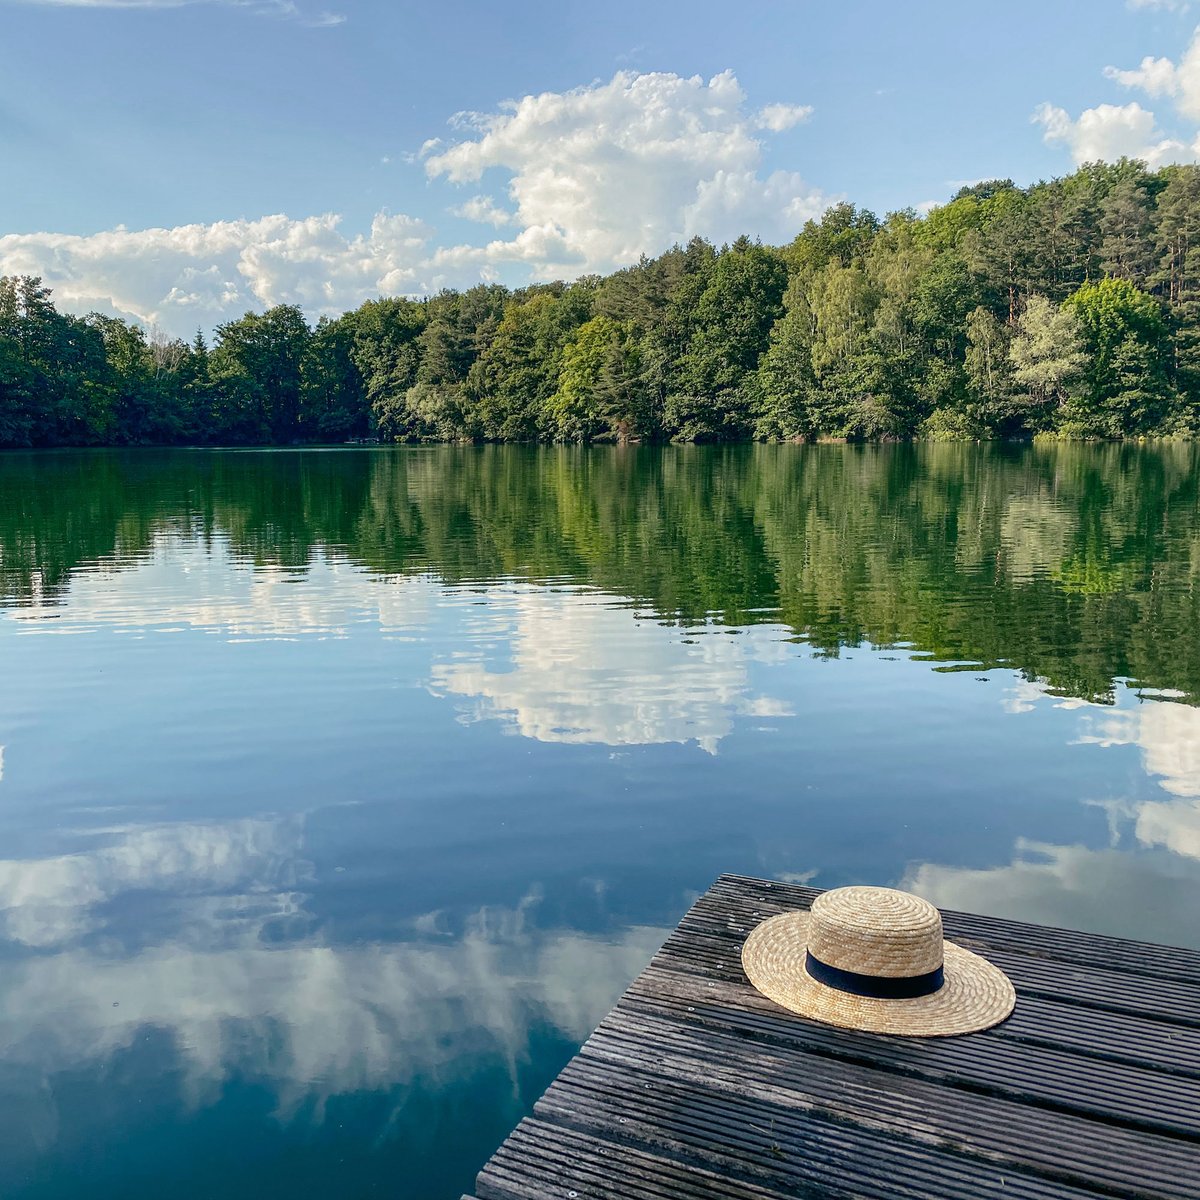 Our guests often remark how peaceful and quiet it is here in the summer. With no power boats allowed on the water, the only wakes we get are from canoes and kayaks, and the only noise is from loon calls and family laughter! BOOK SOME PEACE AND QUIET -> walkerlakeresort.com